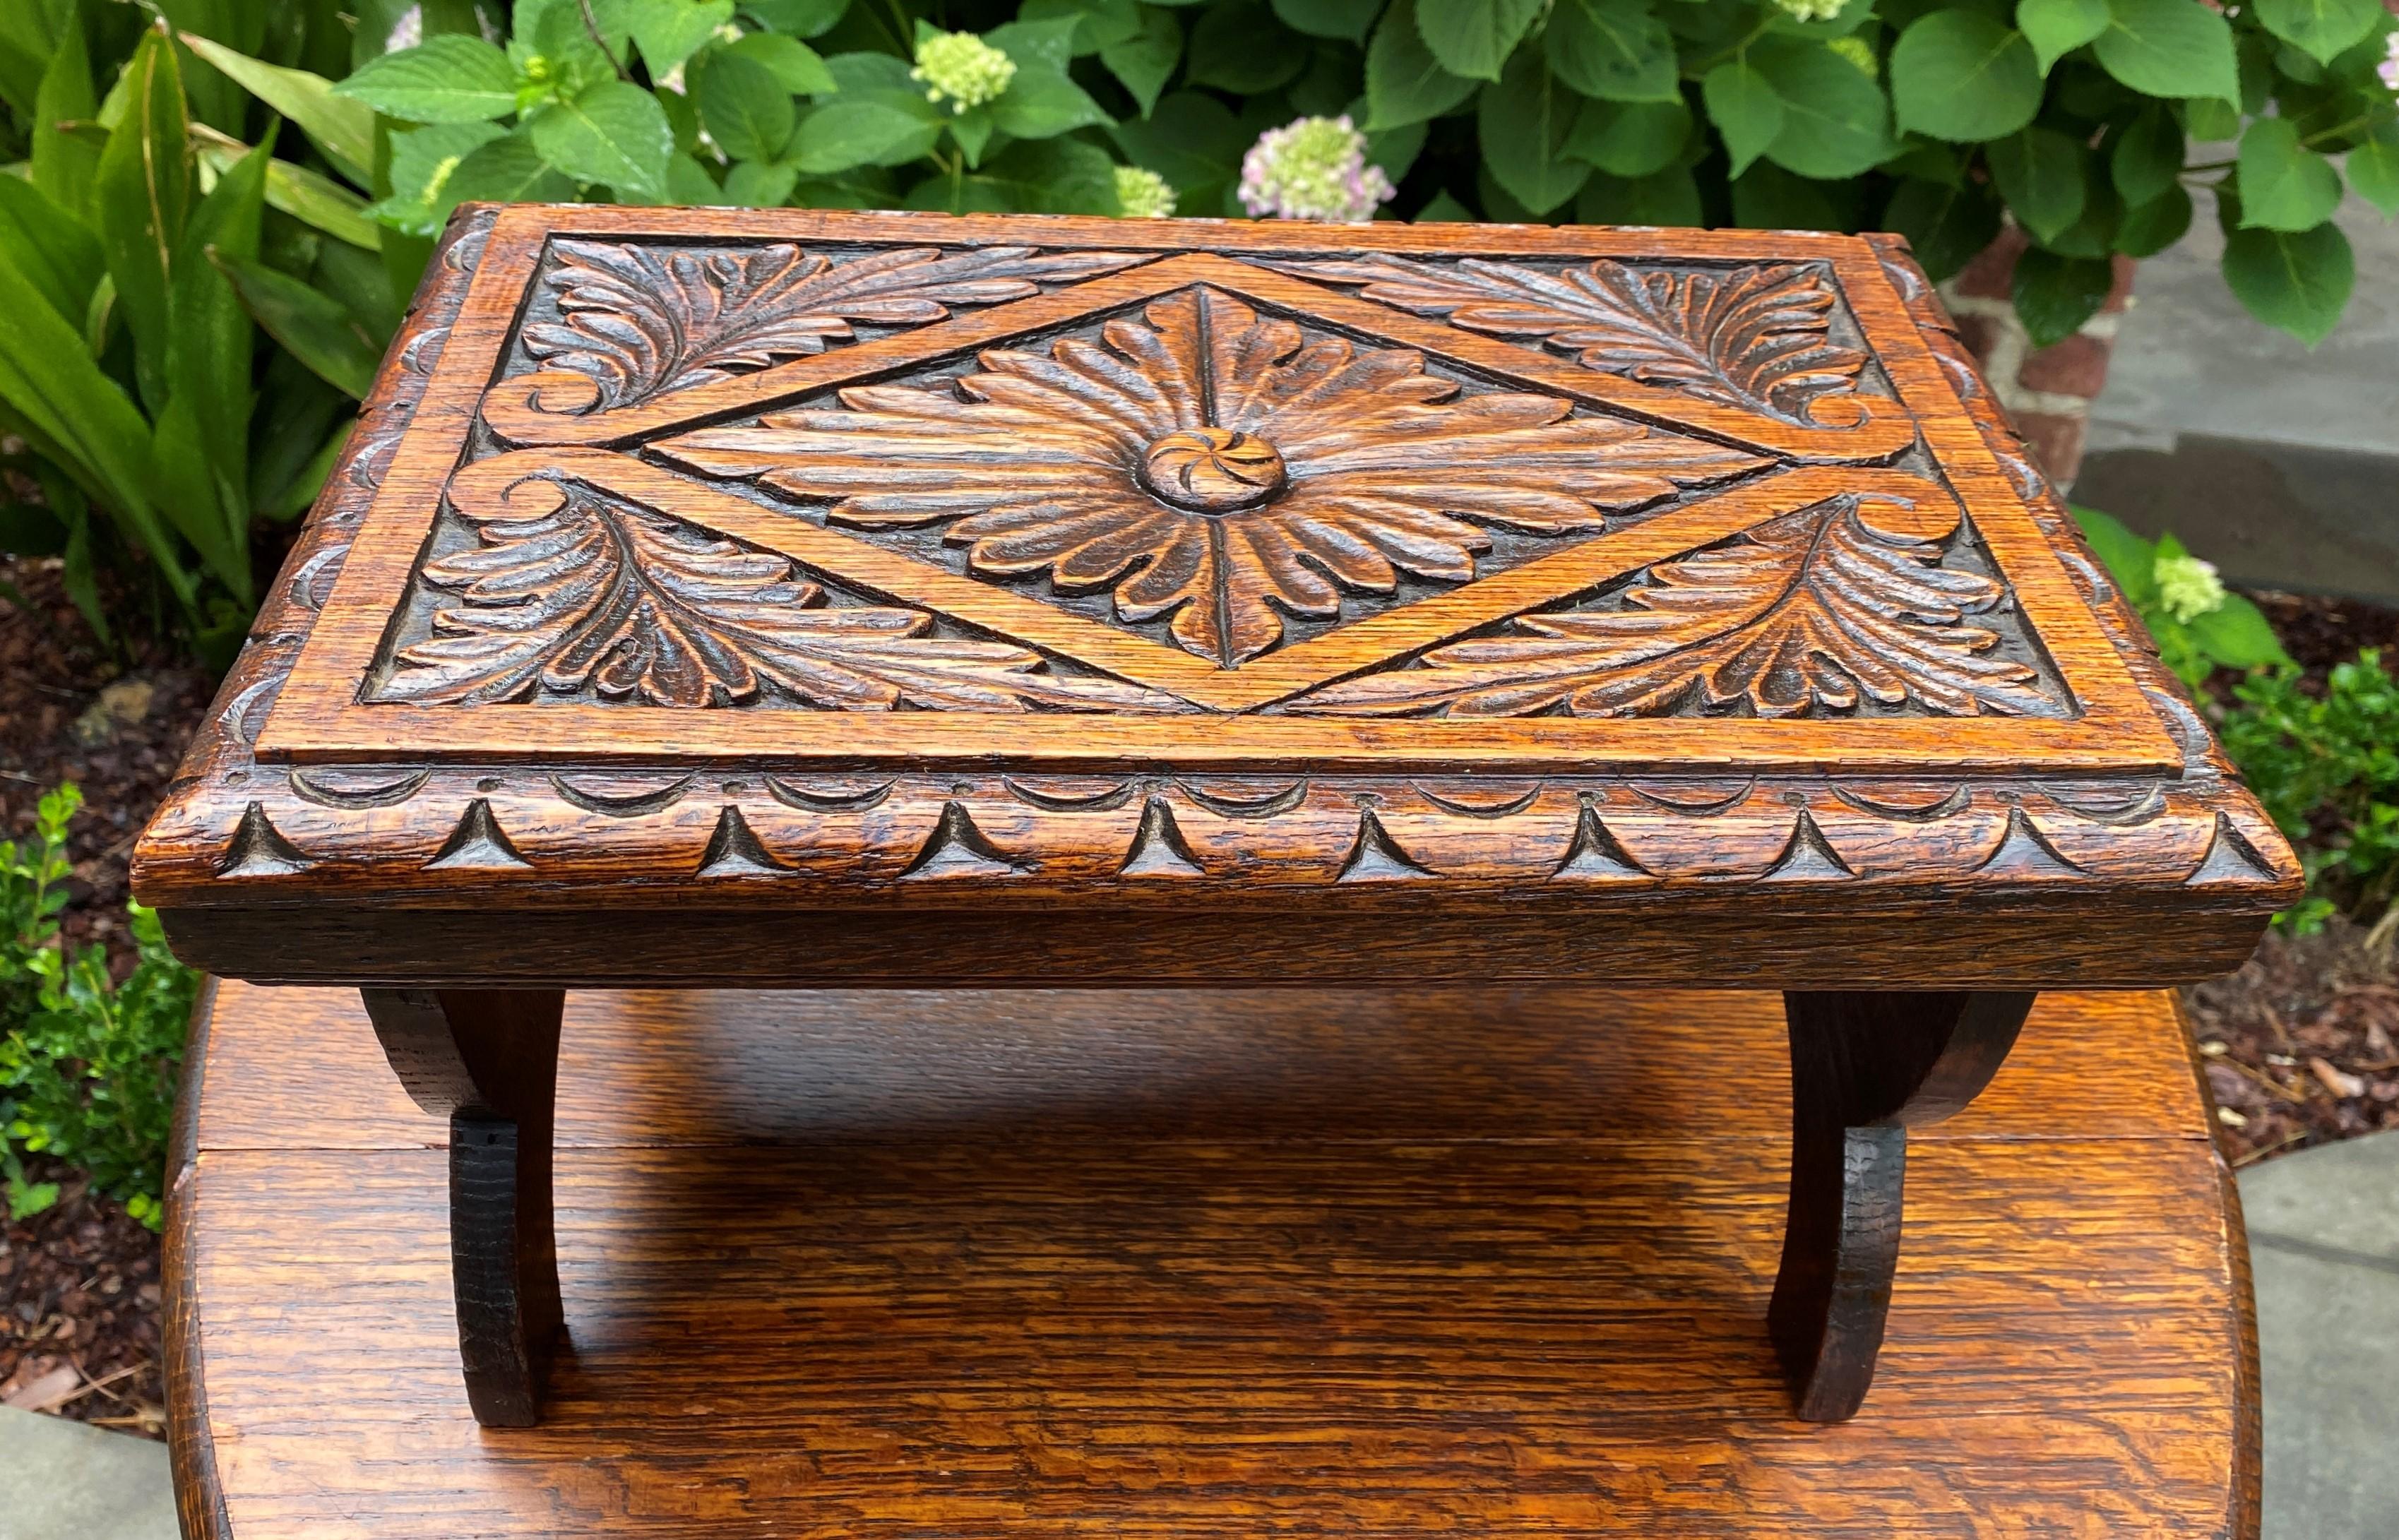 CHARMING Antique English Oak Kettle Stand, Bench or Footstool ~~c. 1920s

Classic British flair decorator piece with carved top and sides~~always in high demand!

Perfect for a living area or bedroom footstool or use as a decorative accent for